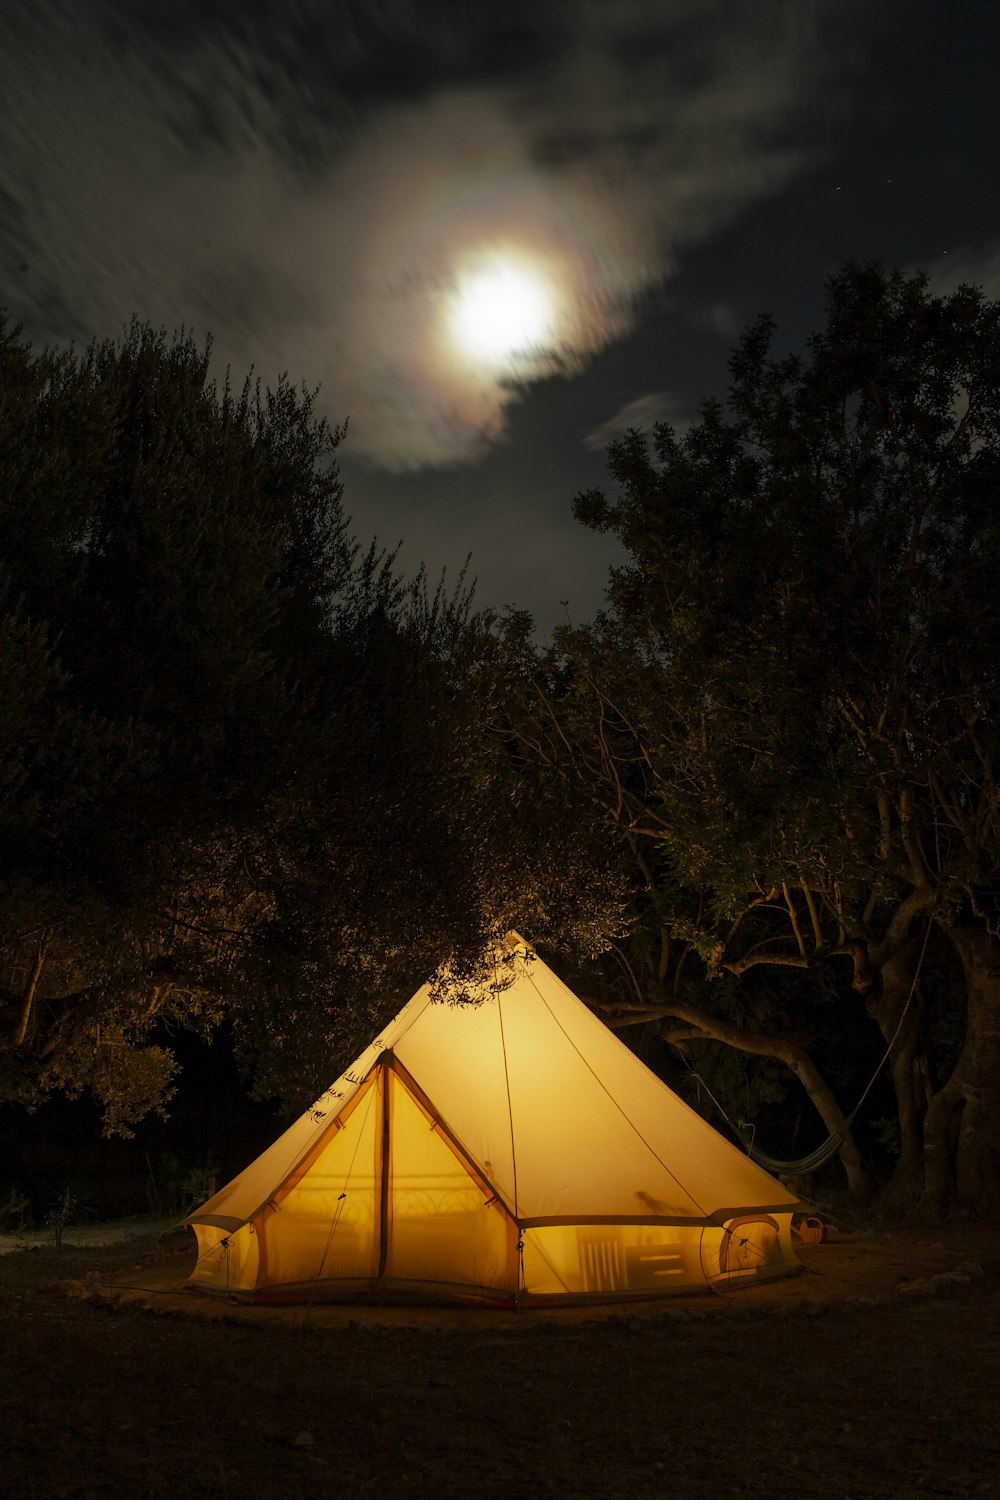 yellow tent surrounded by trees during night time